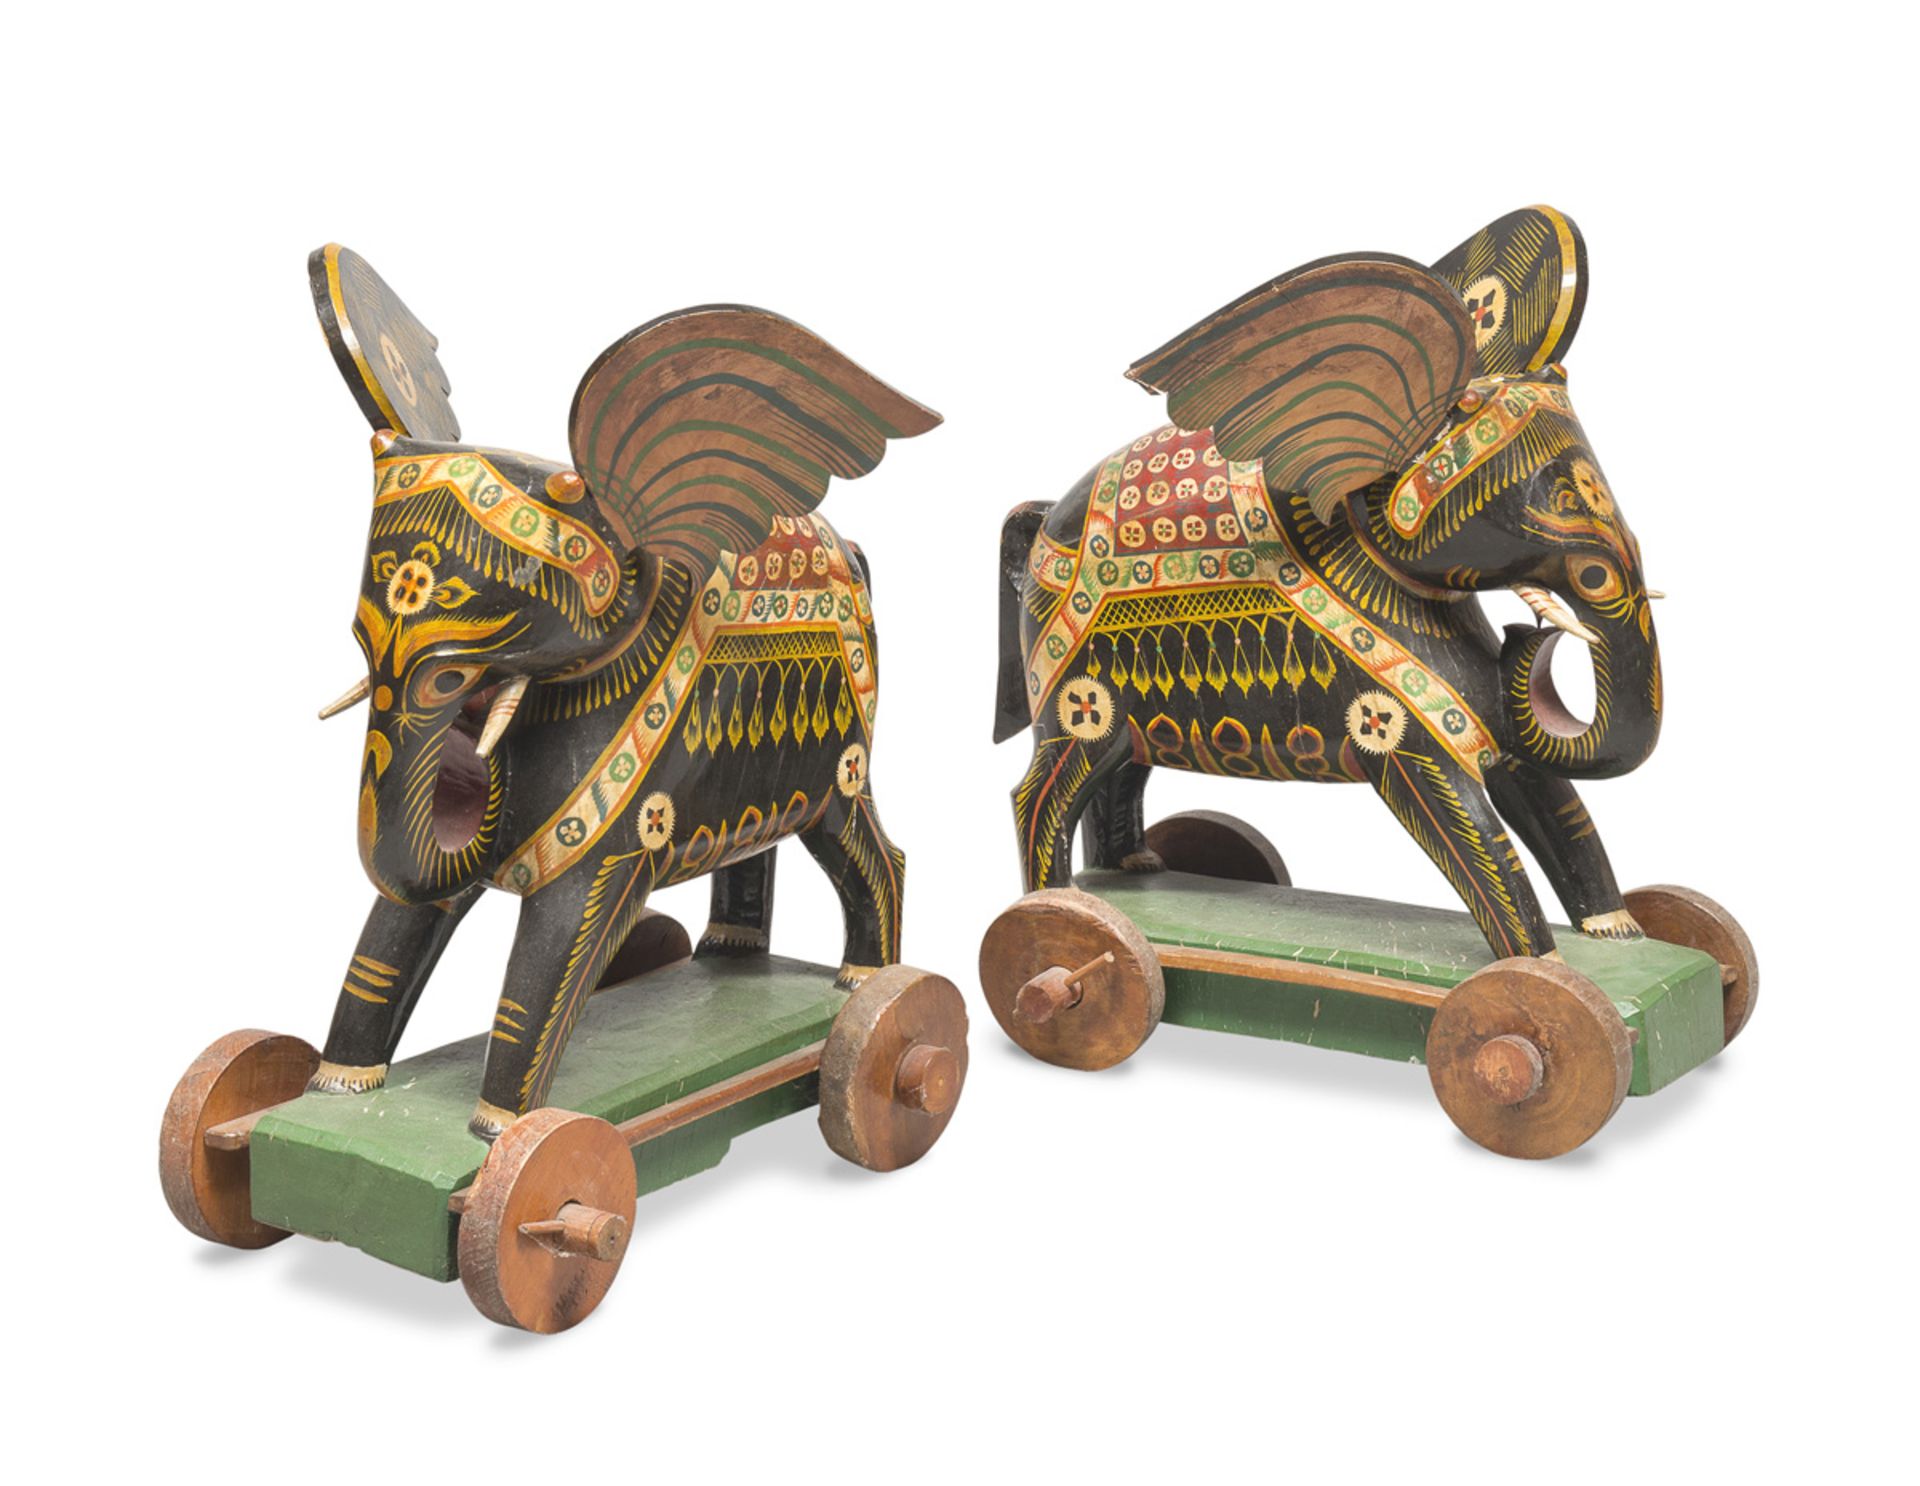 PAIR OF LACQUERED WOOD TOYS THAILAND EARLY 20TH CENTURY